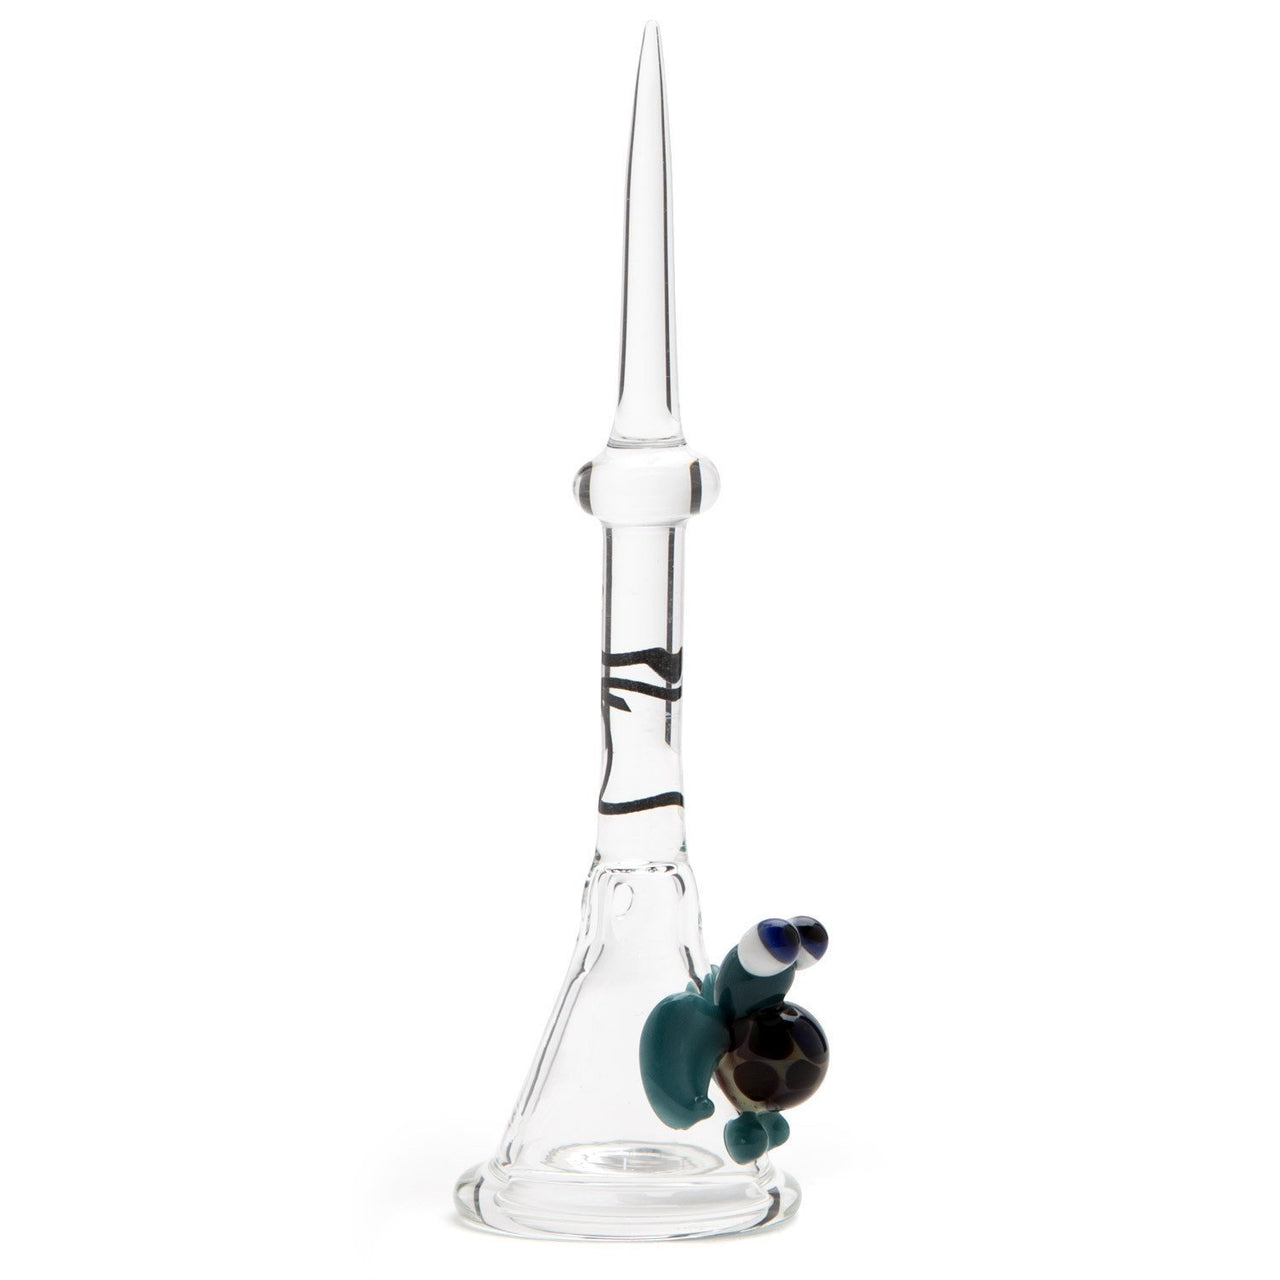 Home Blown Glass Critter Carb Cap Dabber - Turtle - 420 Science - The most trusted online smoke shop.